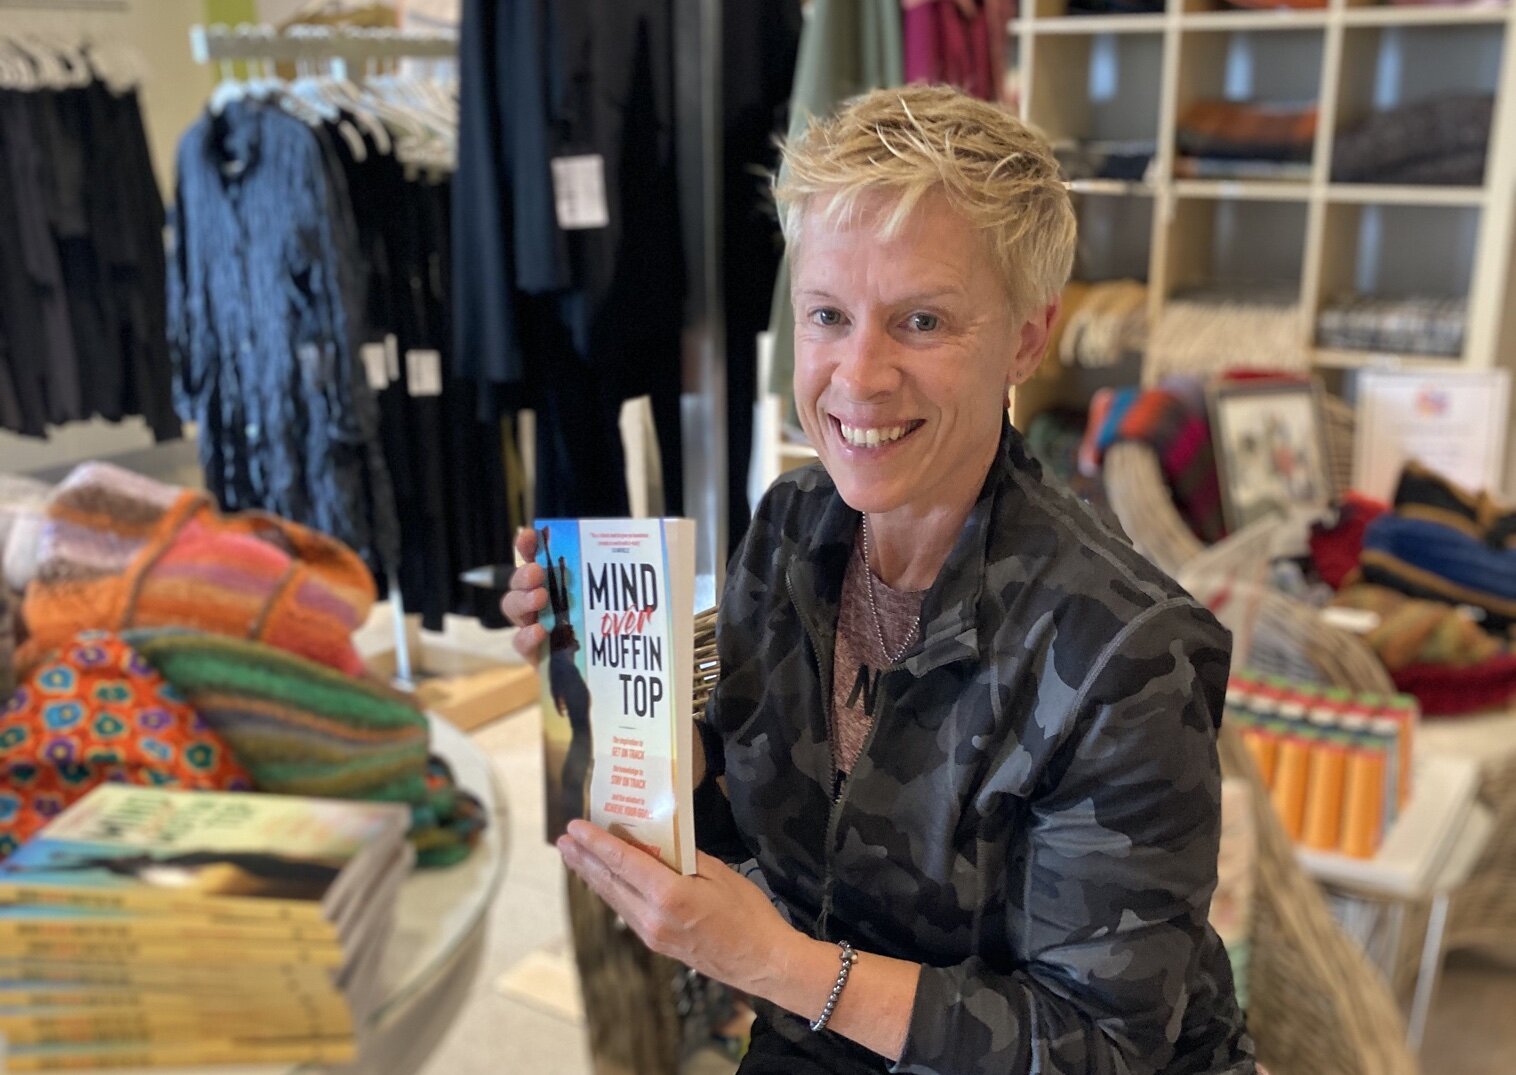 “There’s not just one thing or one tip that is the end-all, be-all fix; it’s a combination of factors. I wanted to write something to inspire people, to movitave them. I wanted to provide that ‘Aha!’ moment for people,” says author Cheryl Keaney.